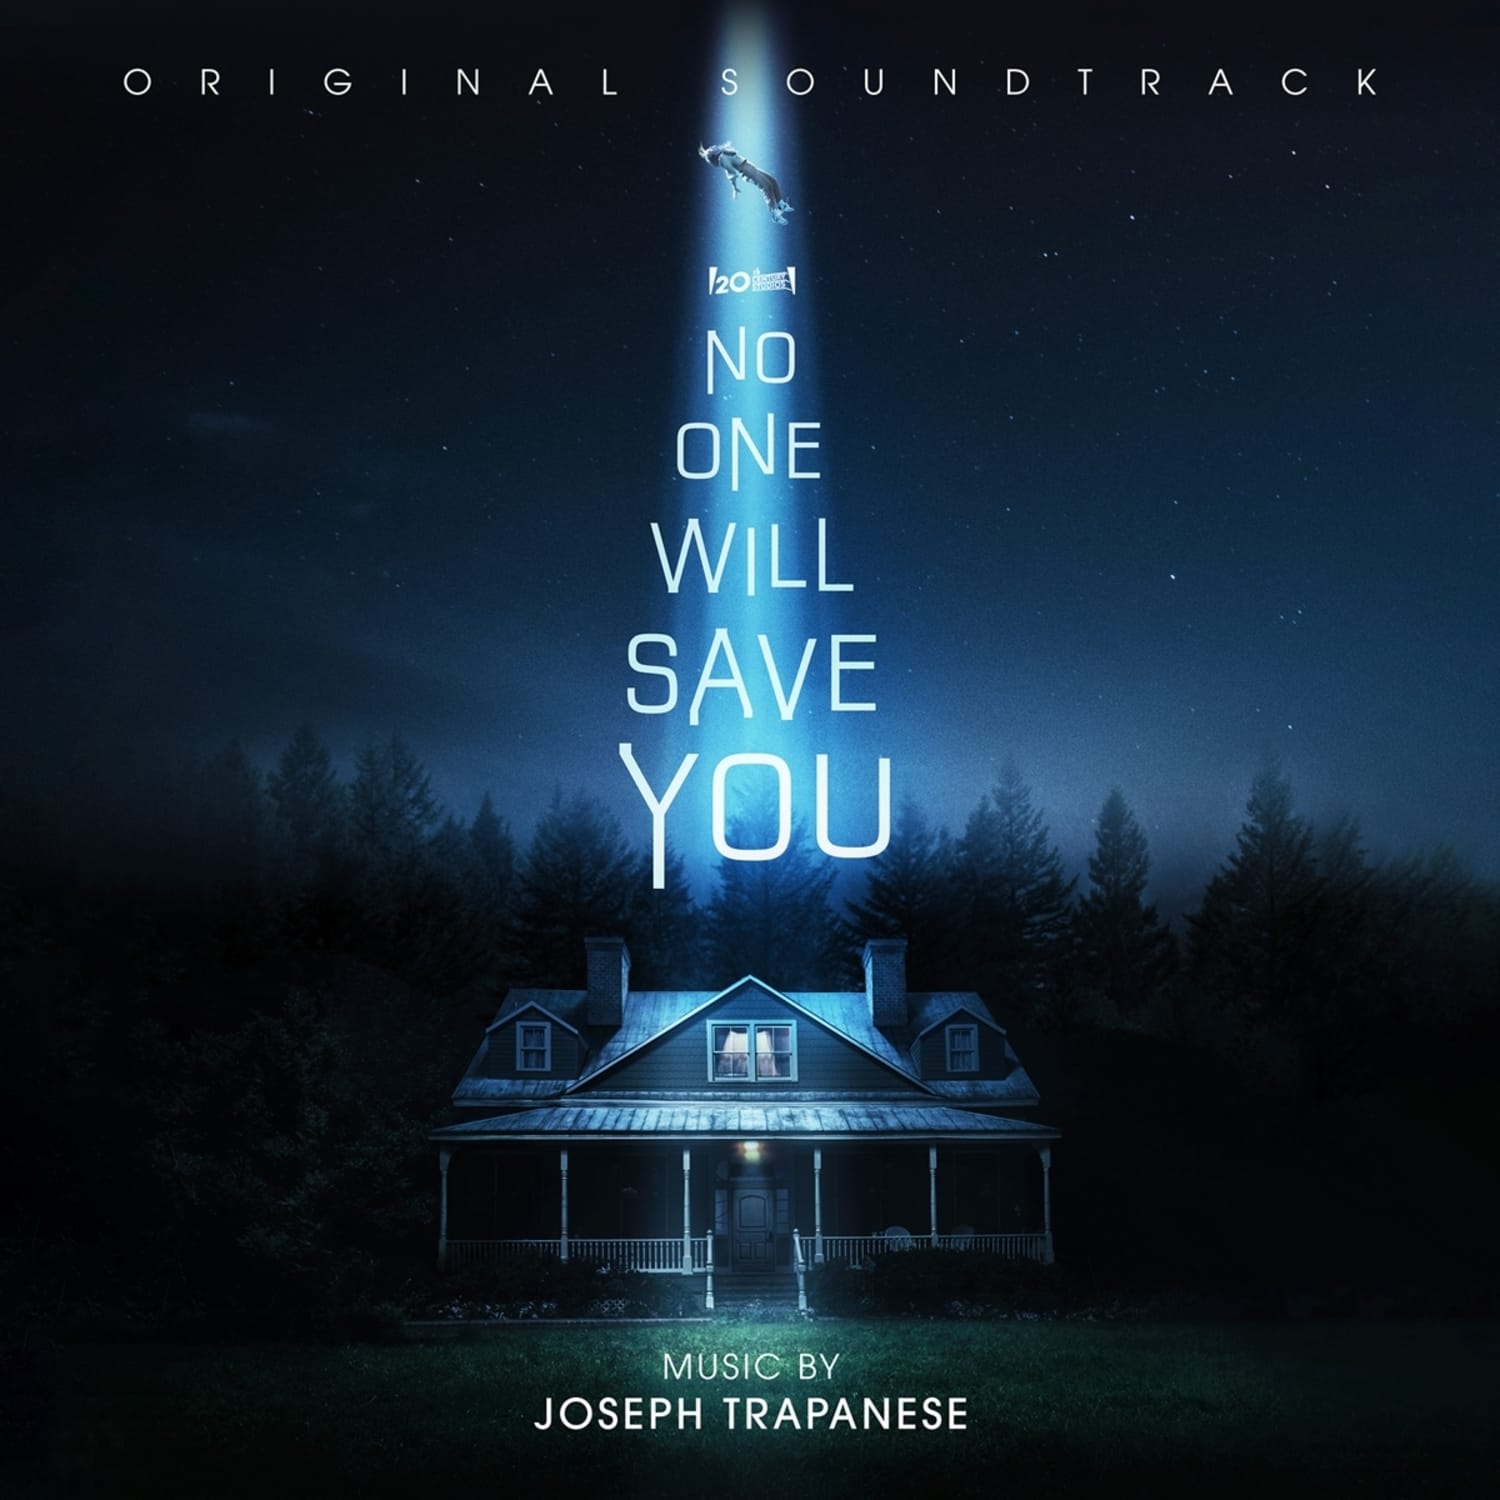 Joseph Trapanese - NO ONE WILL SAVE YOU 